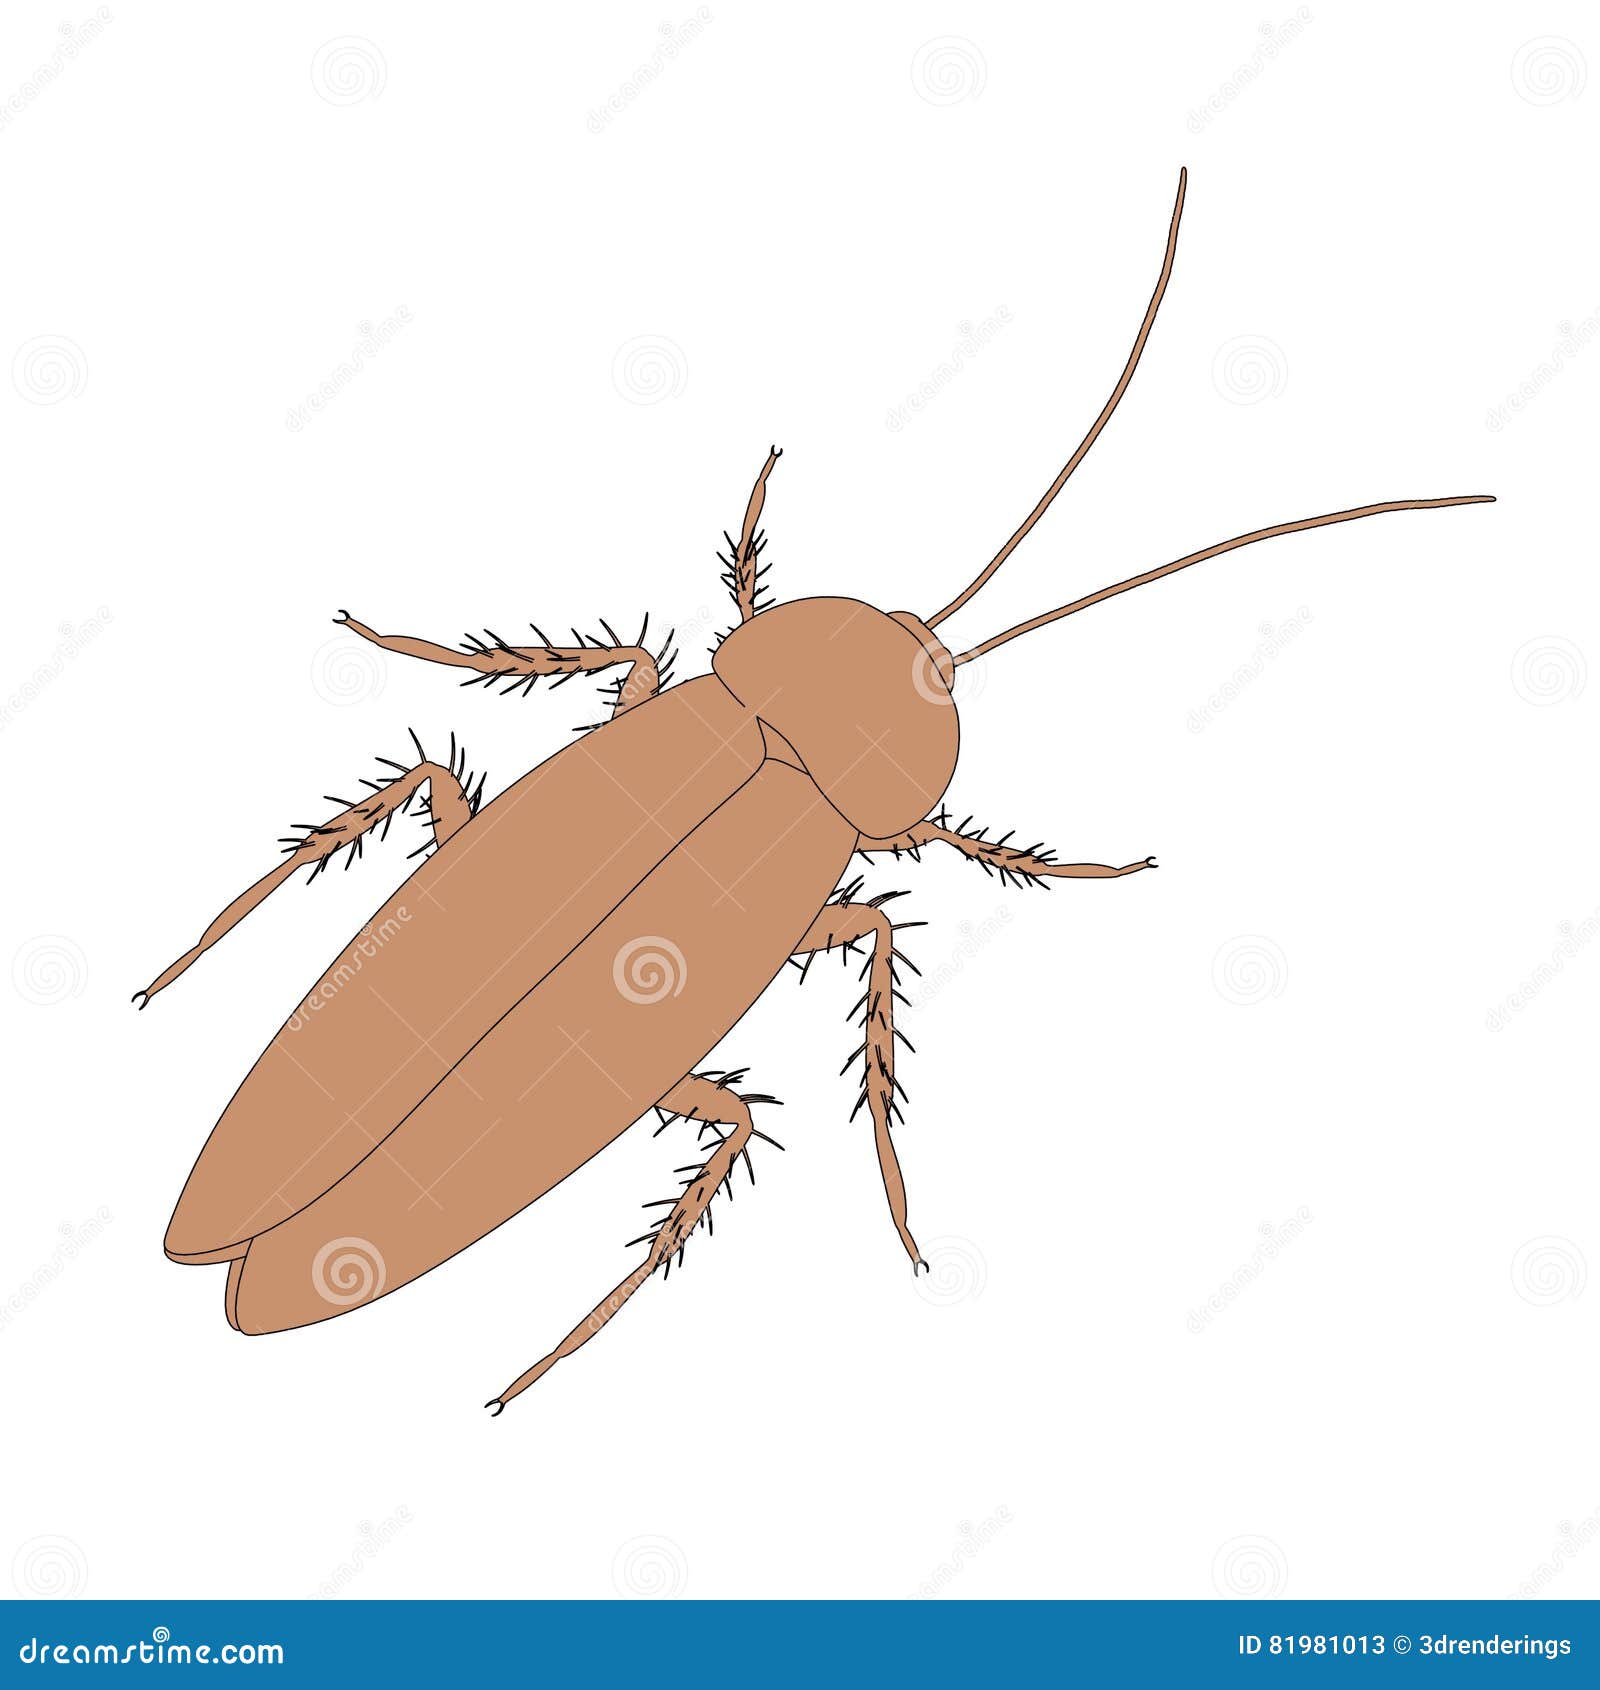 Cockroach stock illustration. Illustration of insect - 81981013